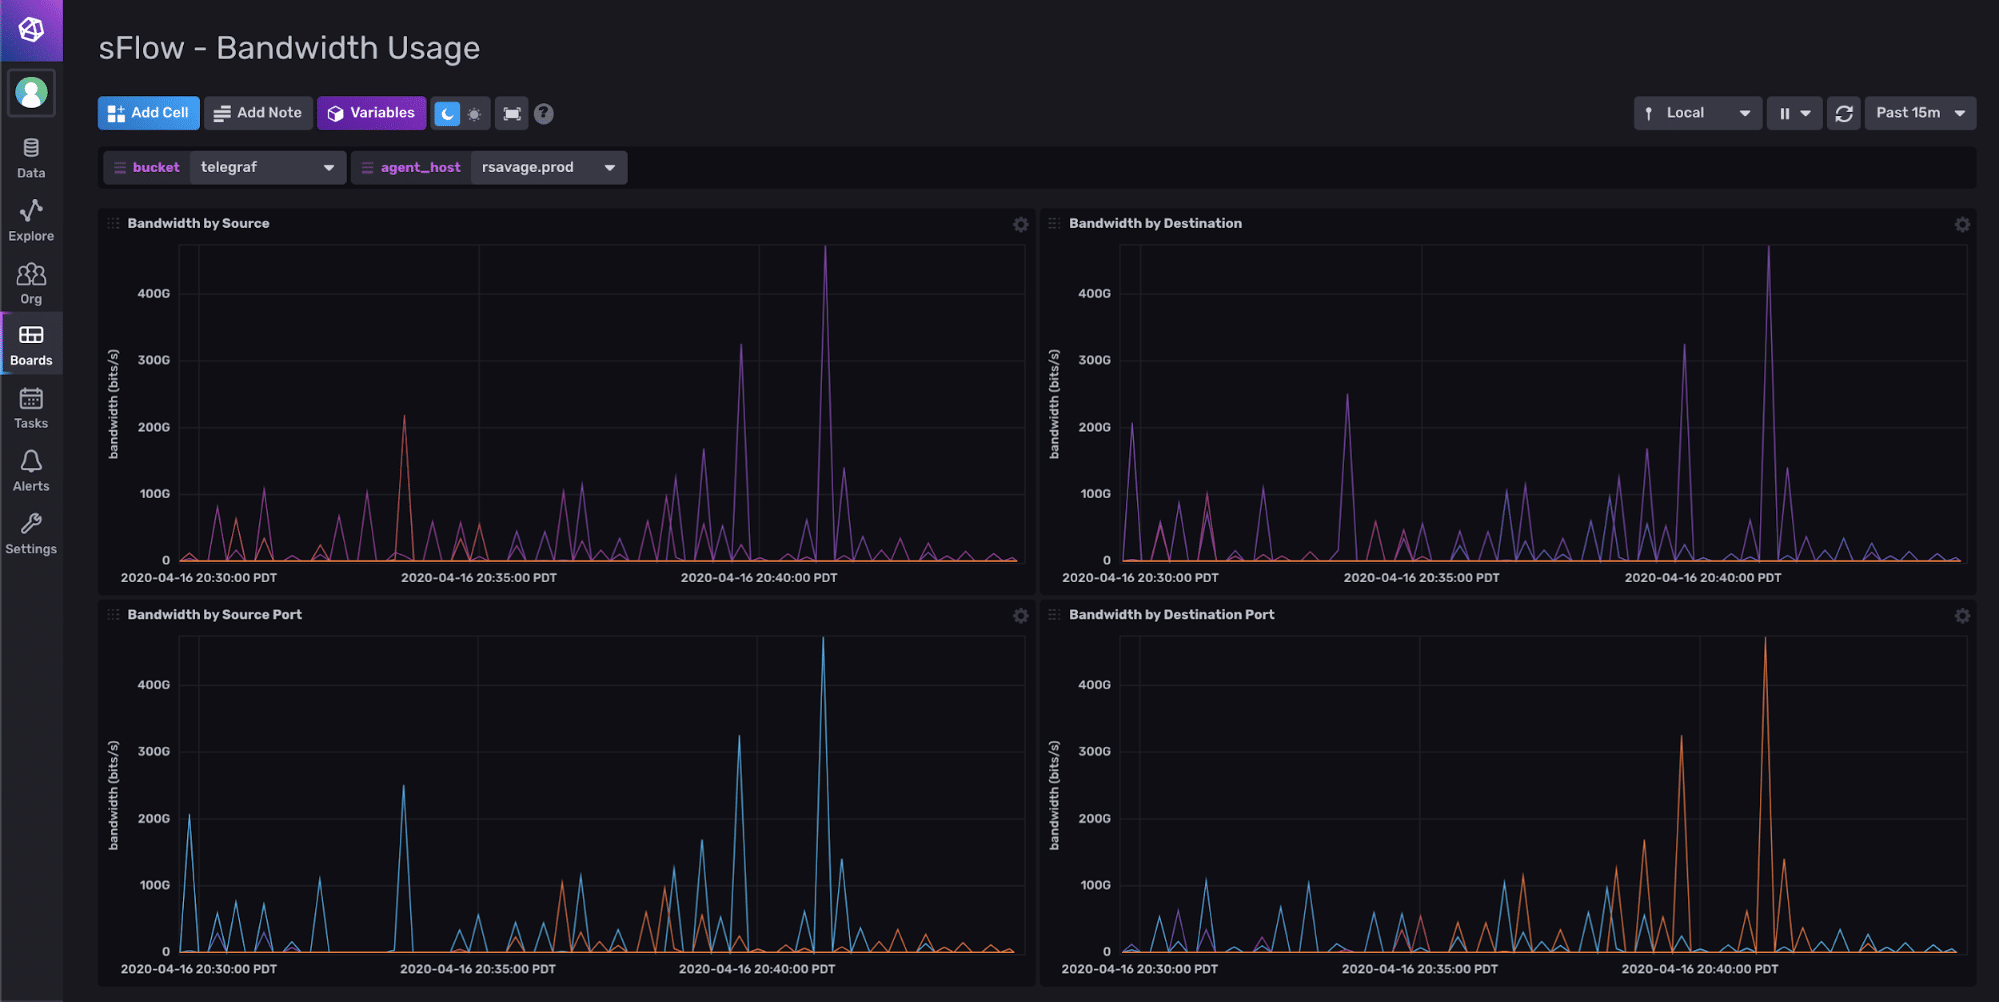 Network monitoring with sFlow Dashboard - Bandwidth Usage